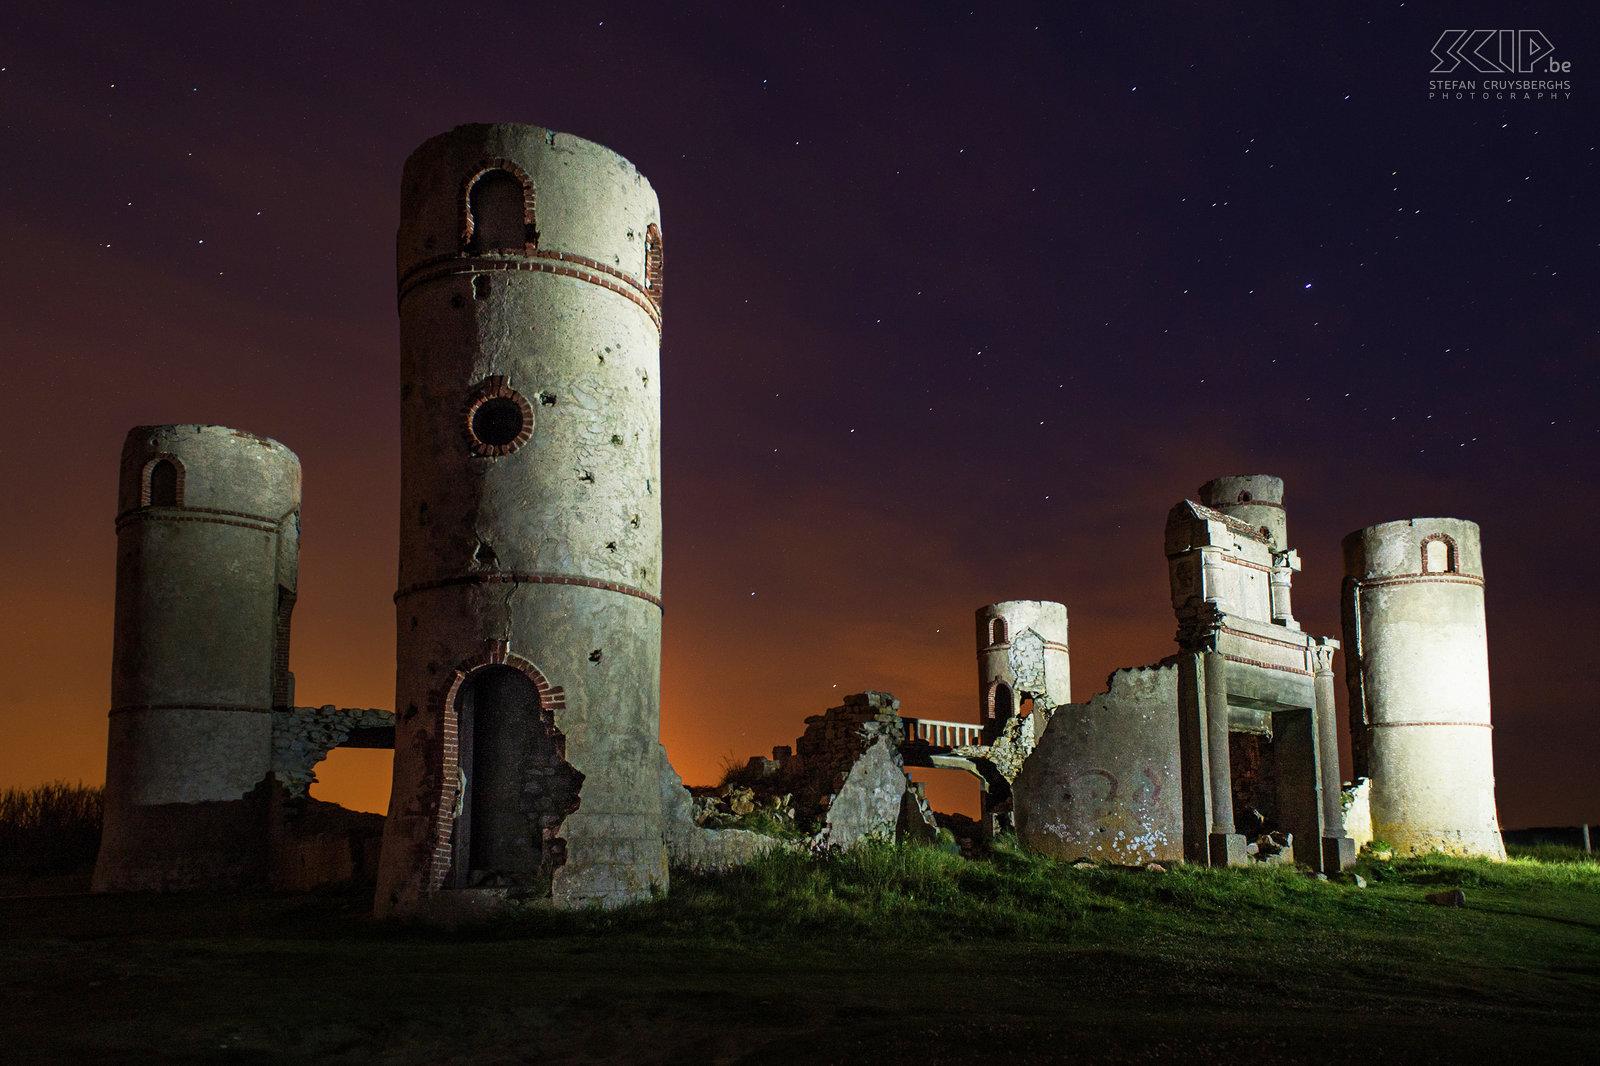 Crozon - Ruines du manoir de Saint-Pol-Roux Night shot with light painting of the ruins of the manor of Saint-Pol-Roux near Camaret-sur-Mer on the Crozon peninsula in Brittany. Paul-Pierre Roux, called Saint-Pol-Roux, was a French Symbolist poet who bought a house near the beach of Pen-Hat overlooking the ocean and transformed it into a manor in the Baroque style. He has been killed in 1940 by a German soldier. The abandoned house was vandalised by the occupying force and now the manor is a ruin. Stefan Cruysberghs